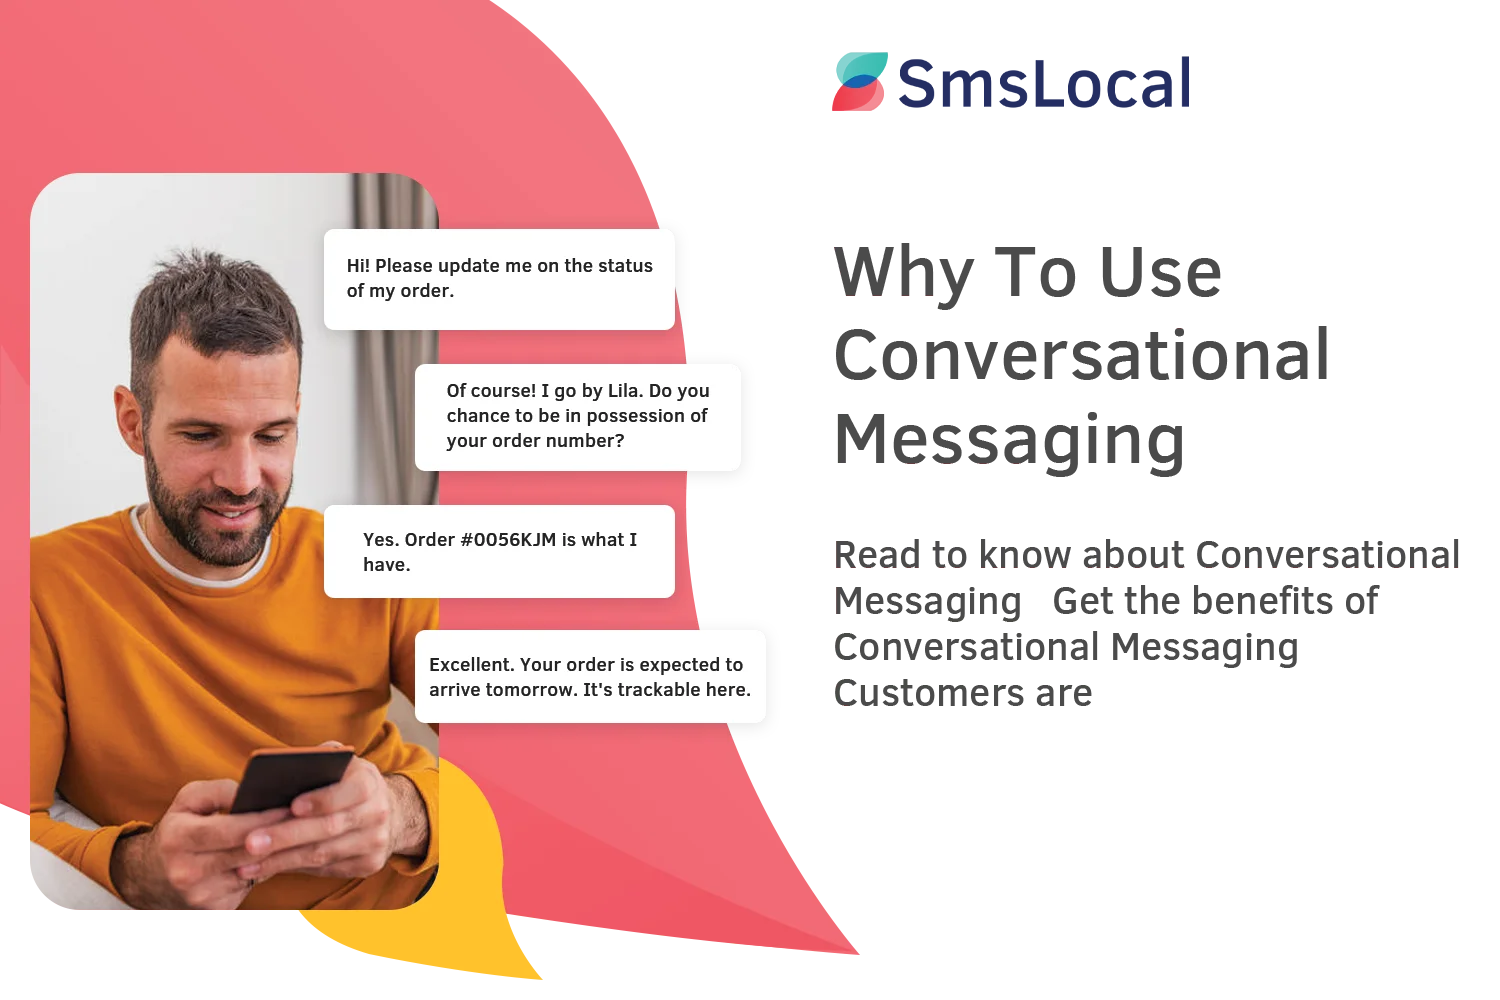 Why-To-Use-Conversational-Messaging